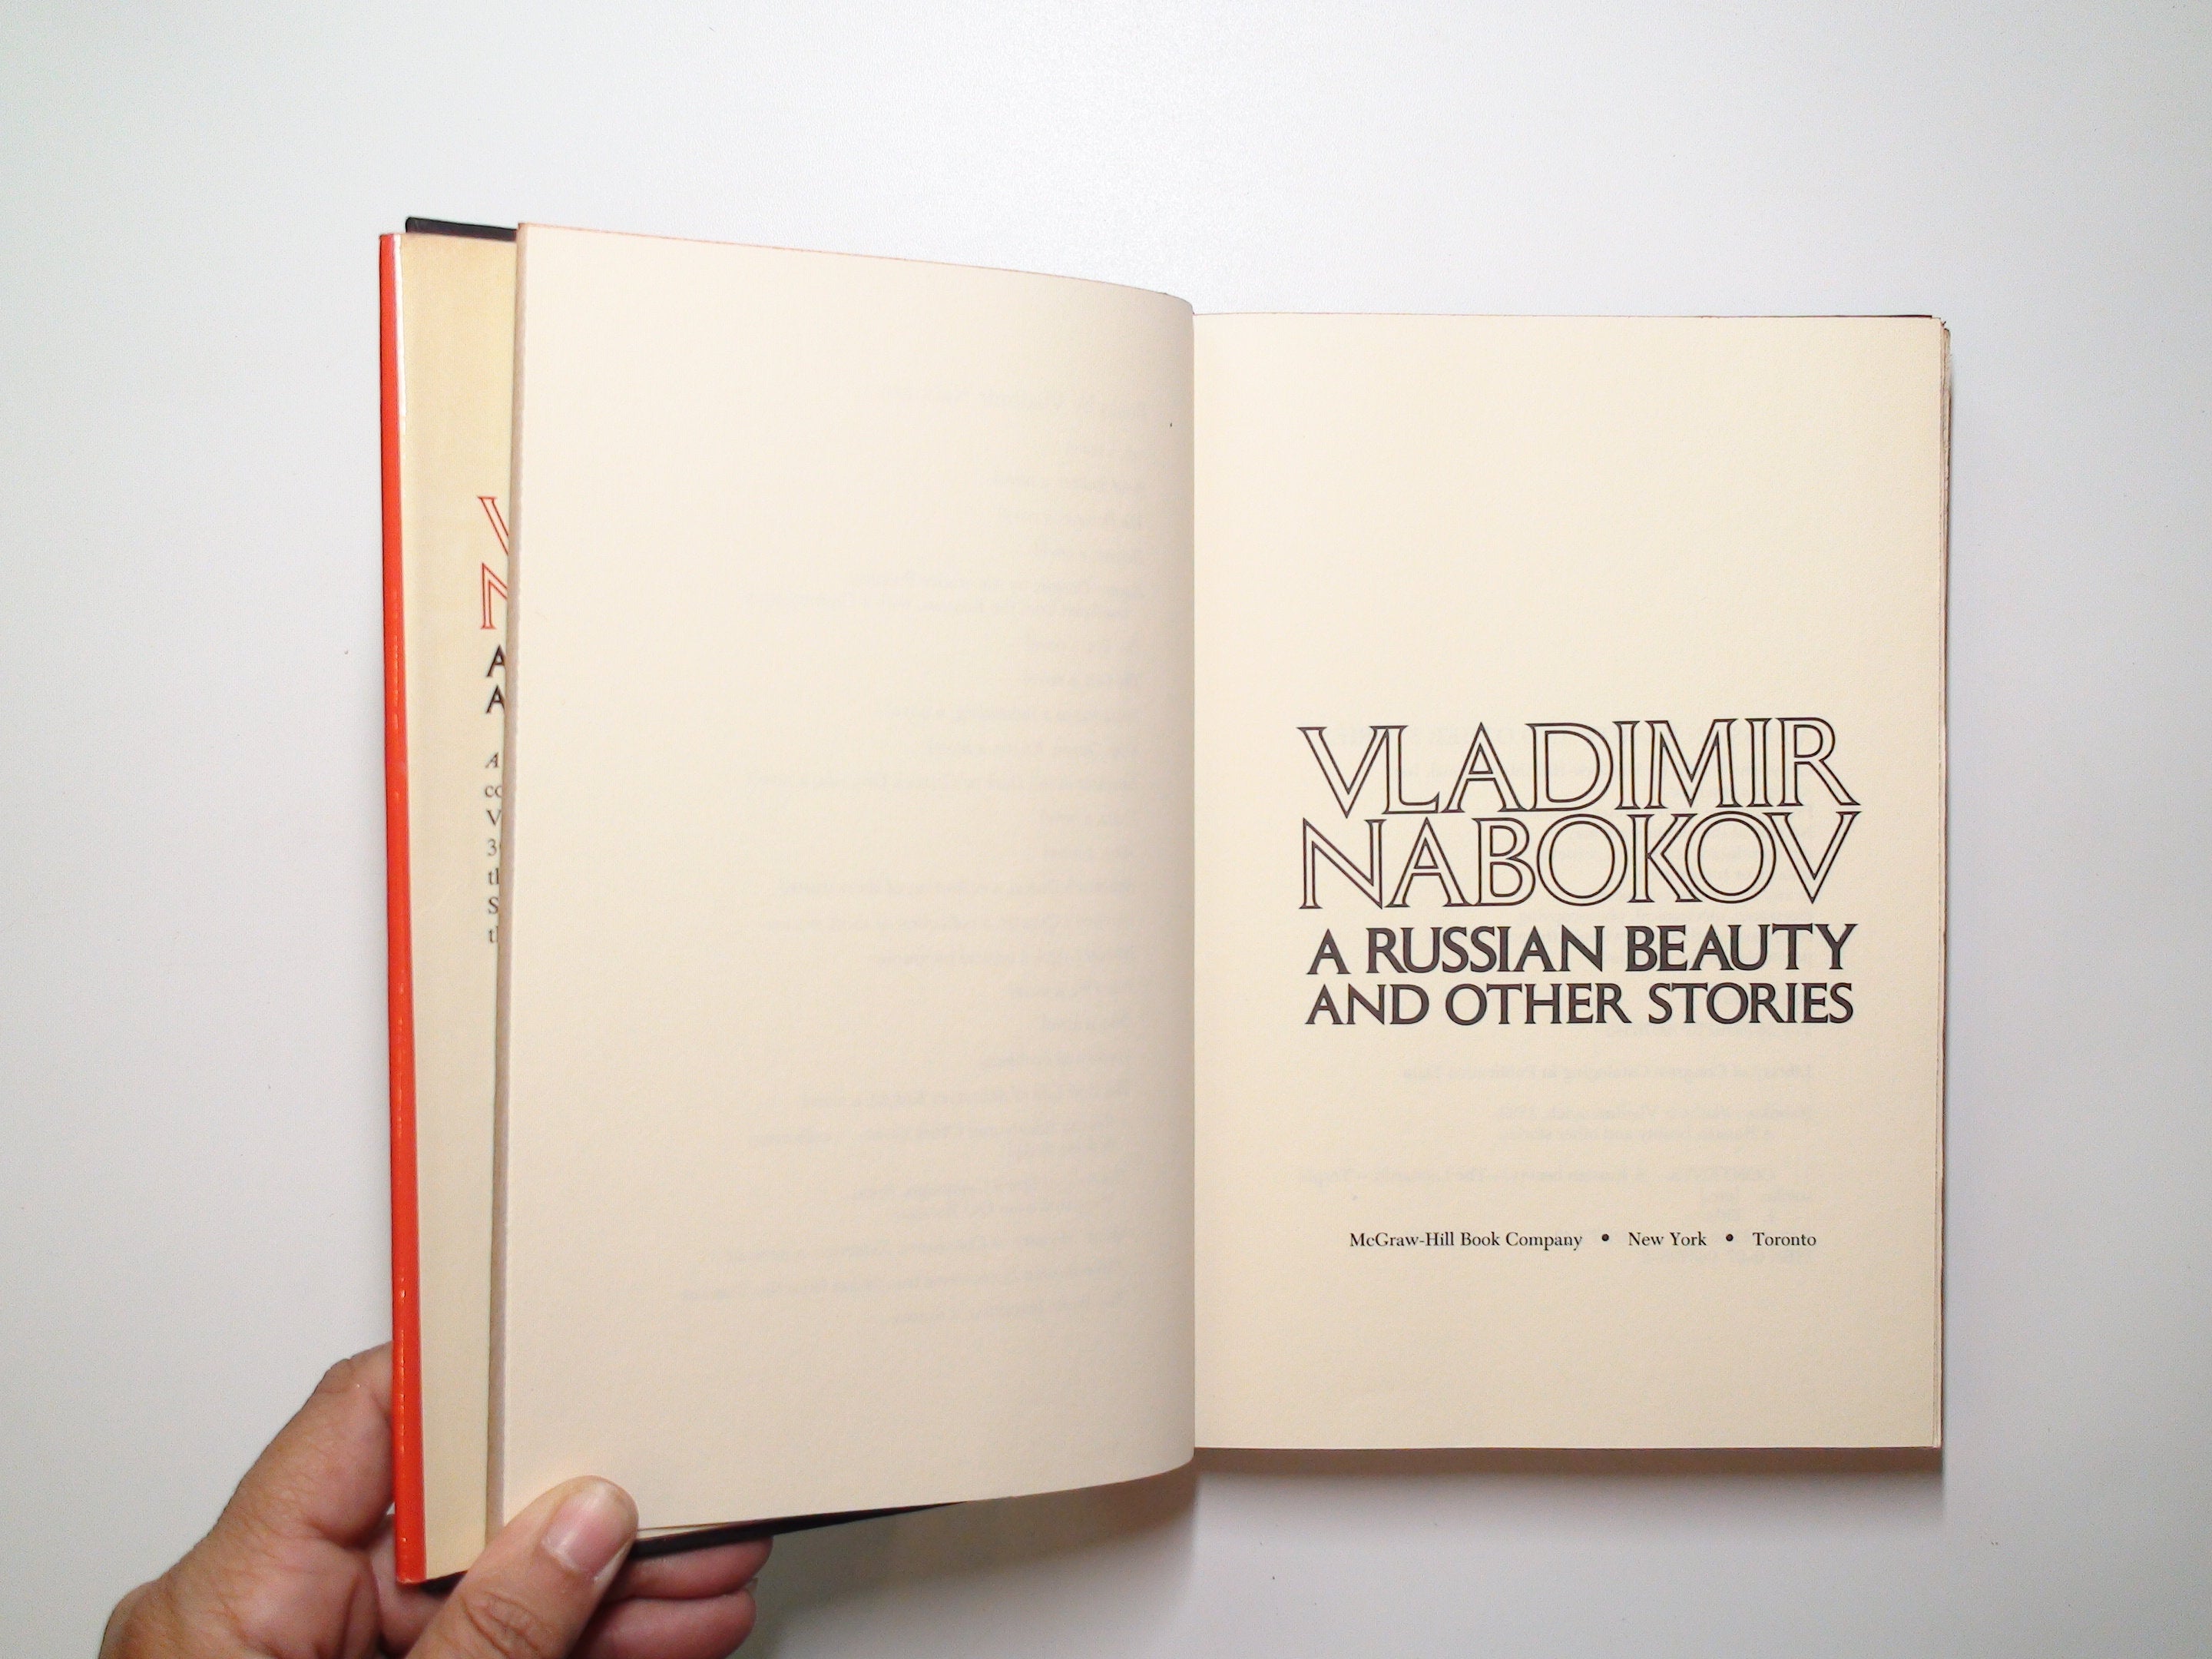 A Russian Beauty and Other Stories, Vladimir Nabokov, 1st Ed, w DJ, 1973